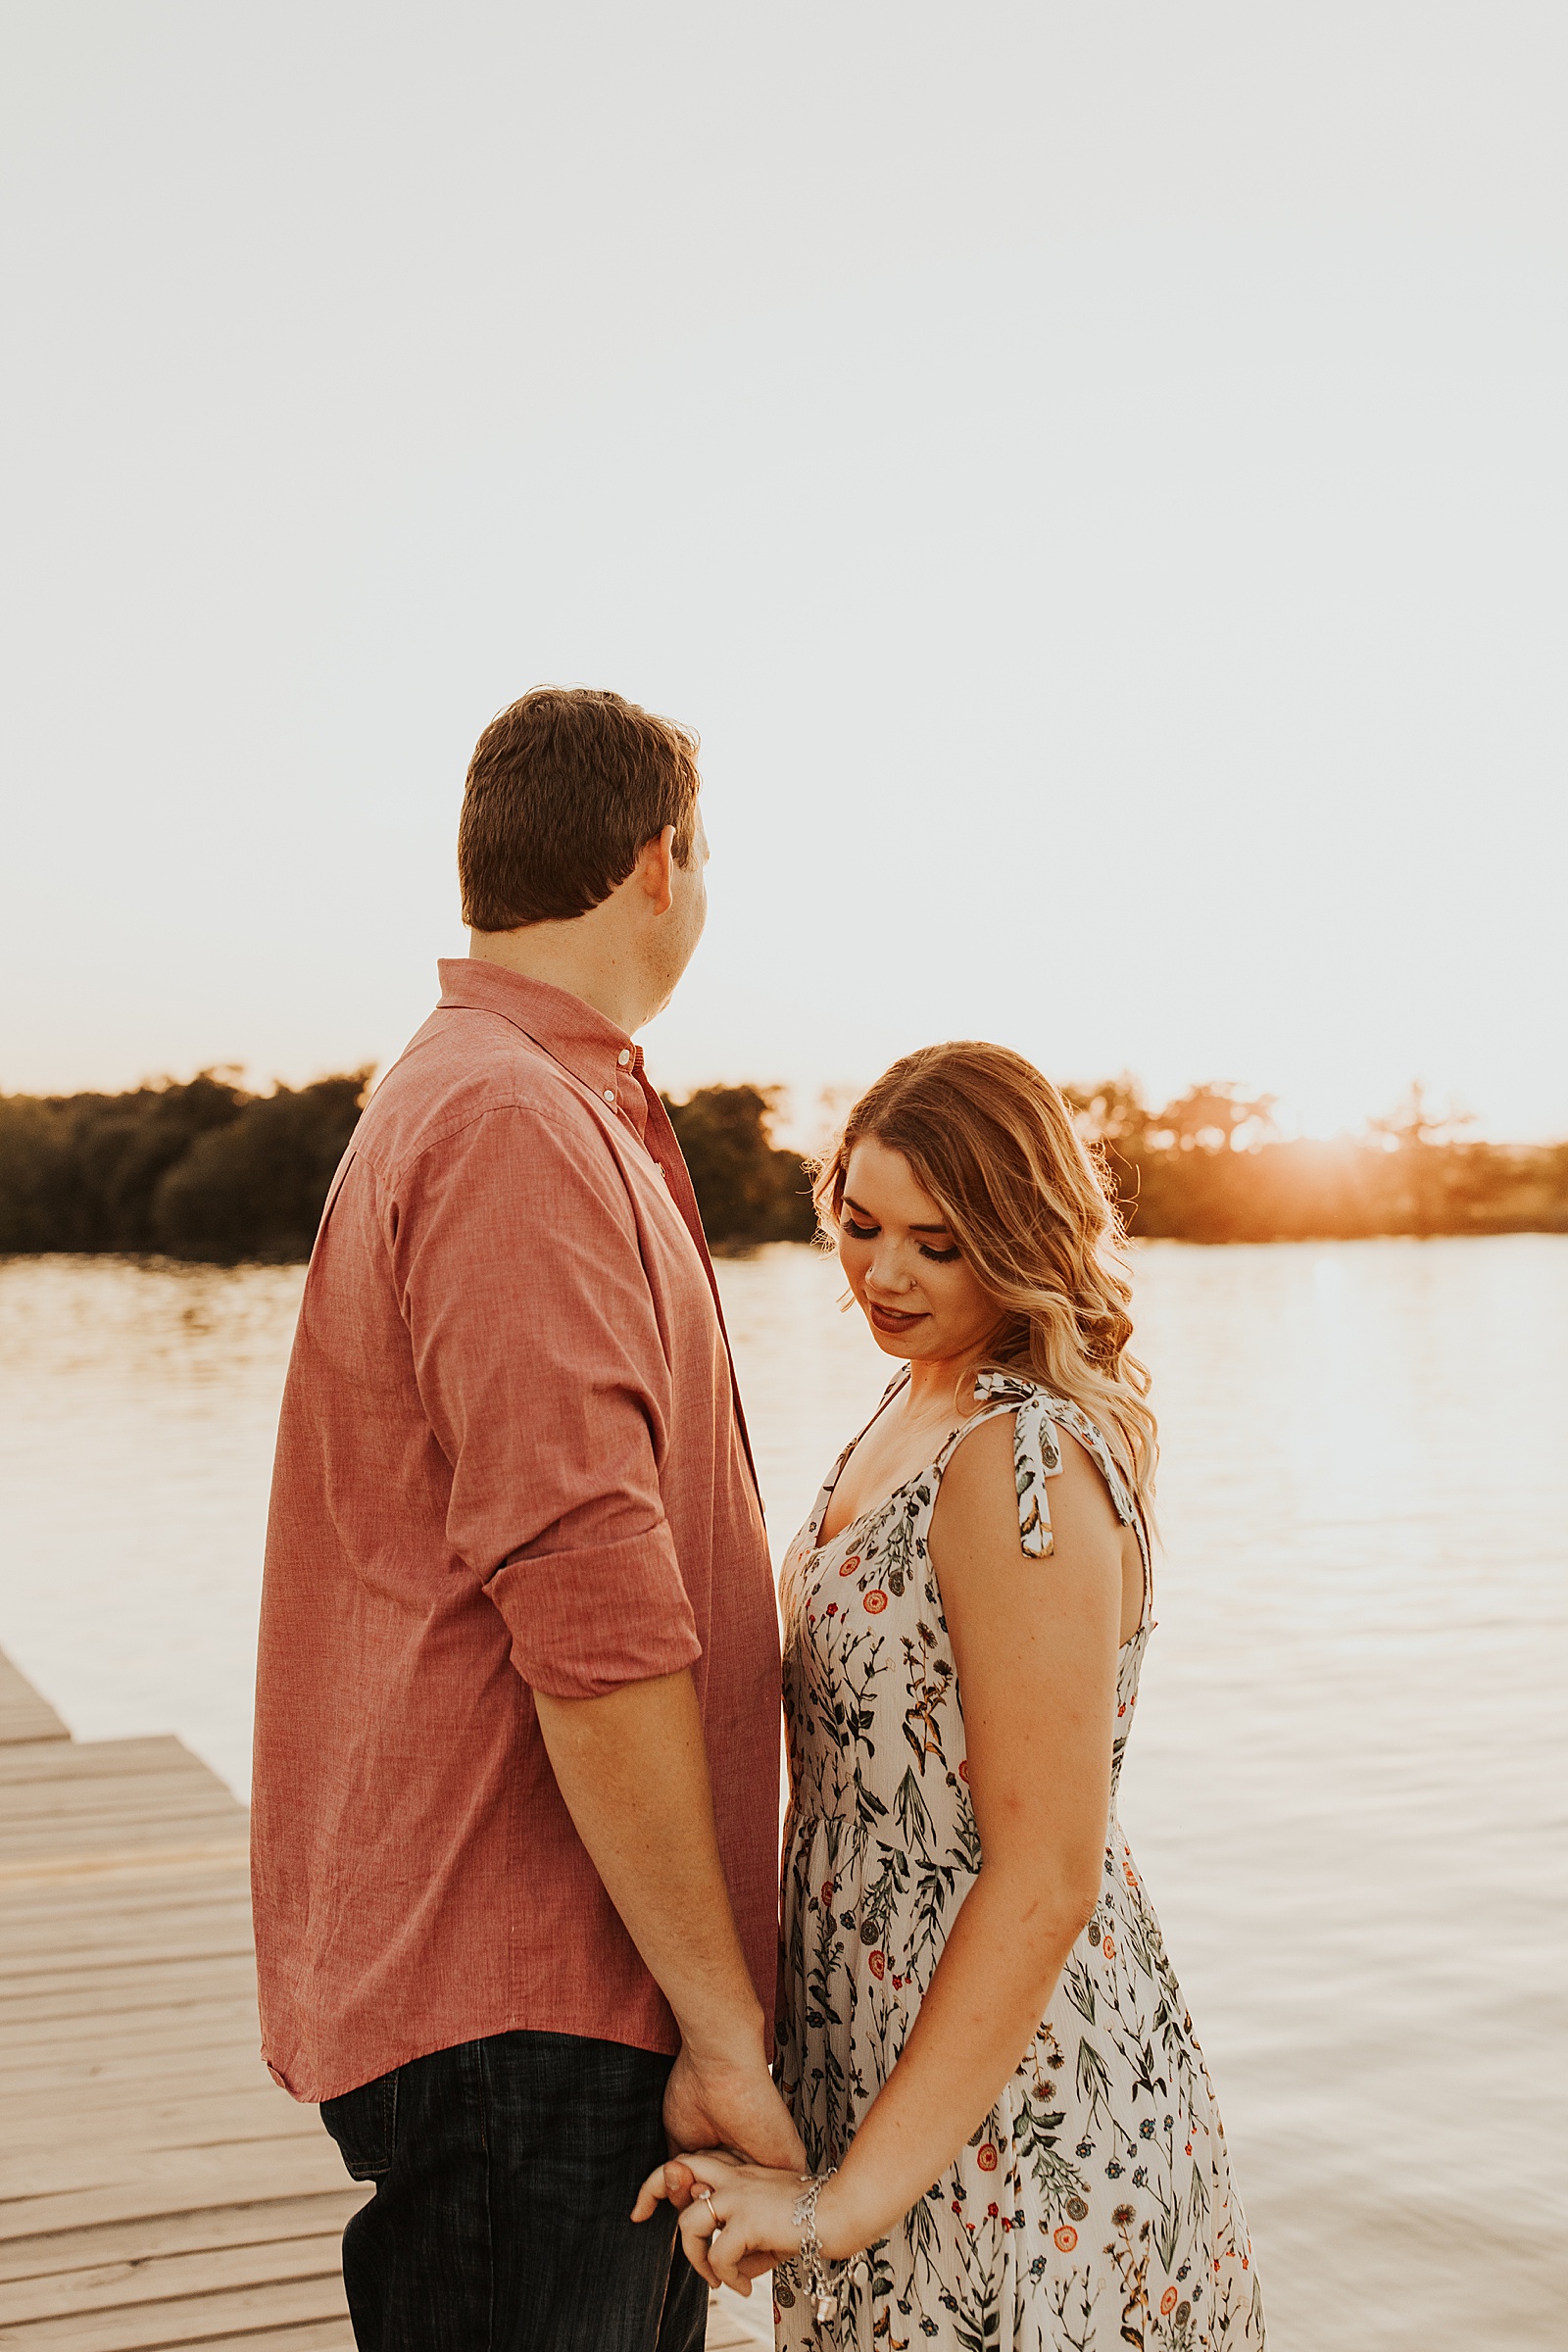 This Boerne engagement session was spent on Main Street and at the lake. 